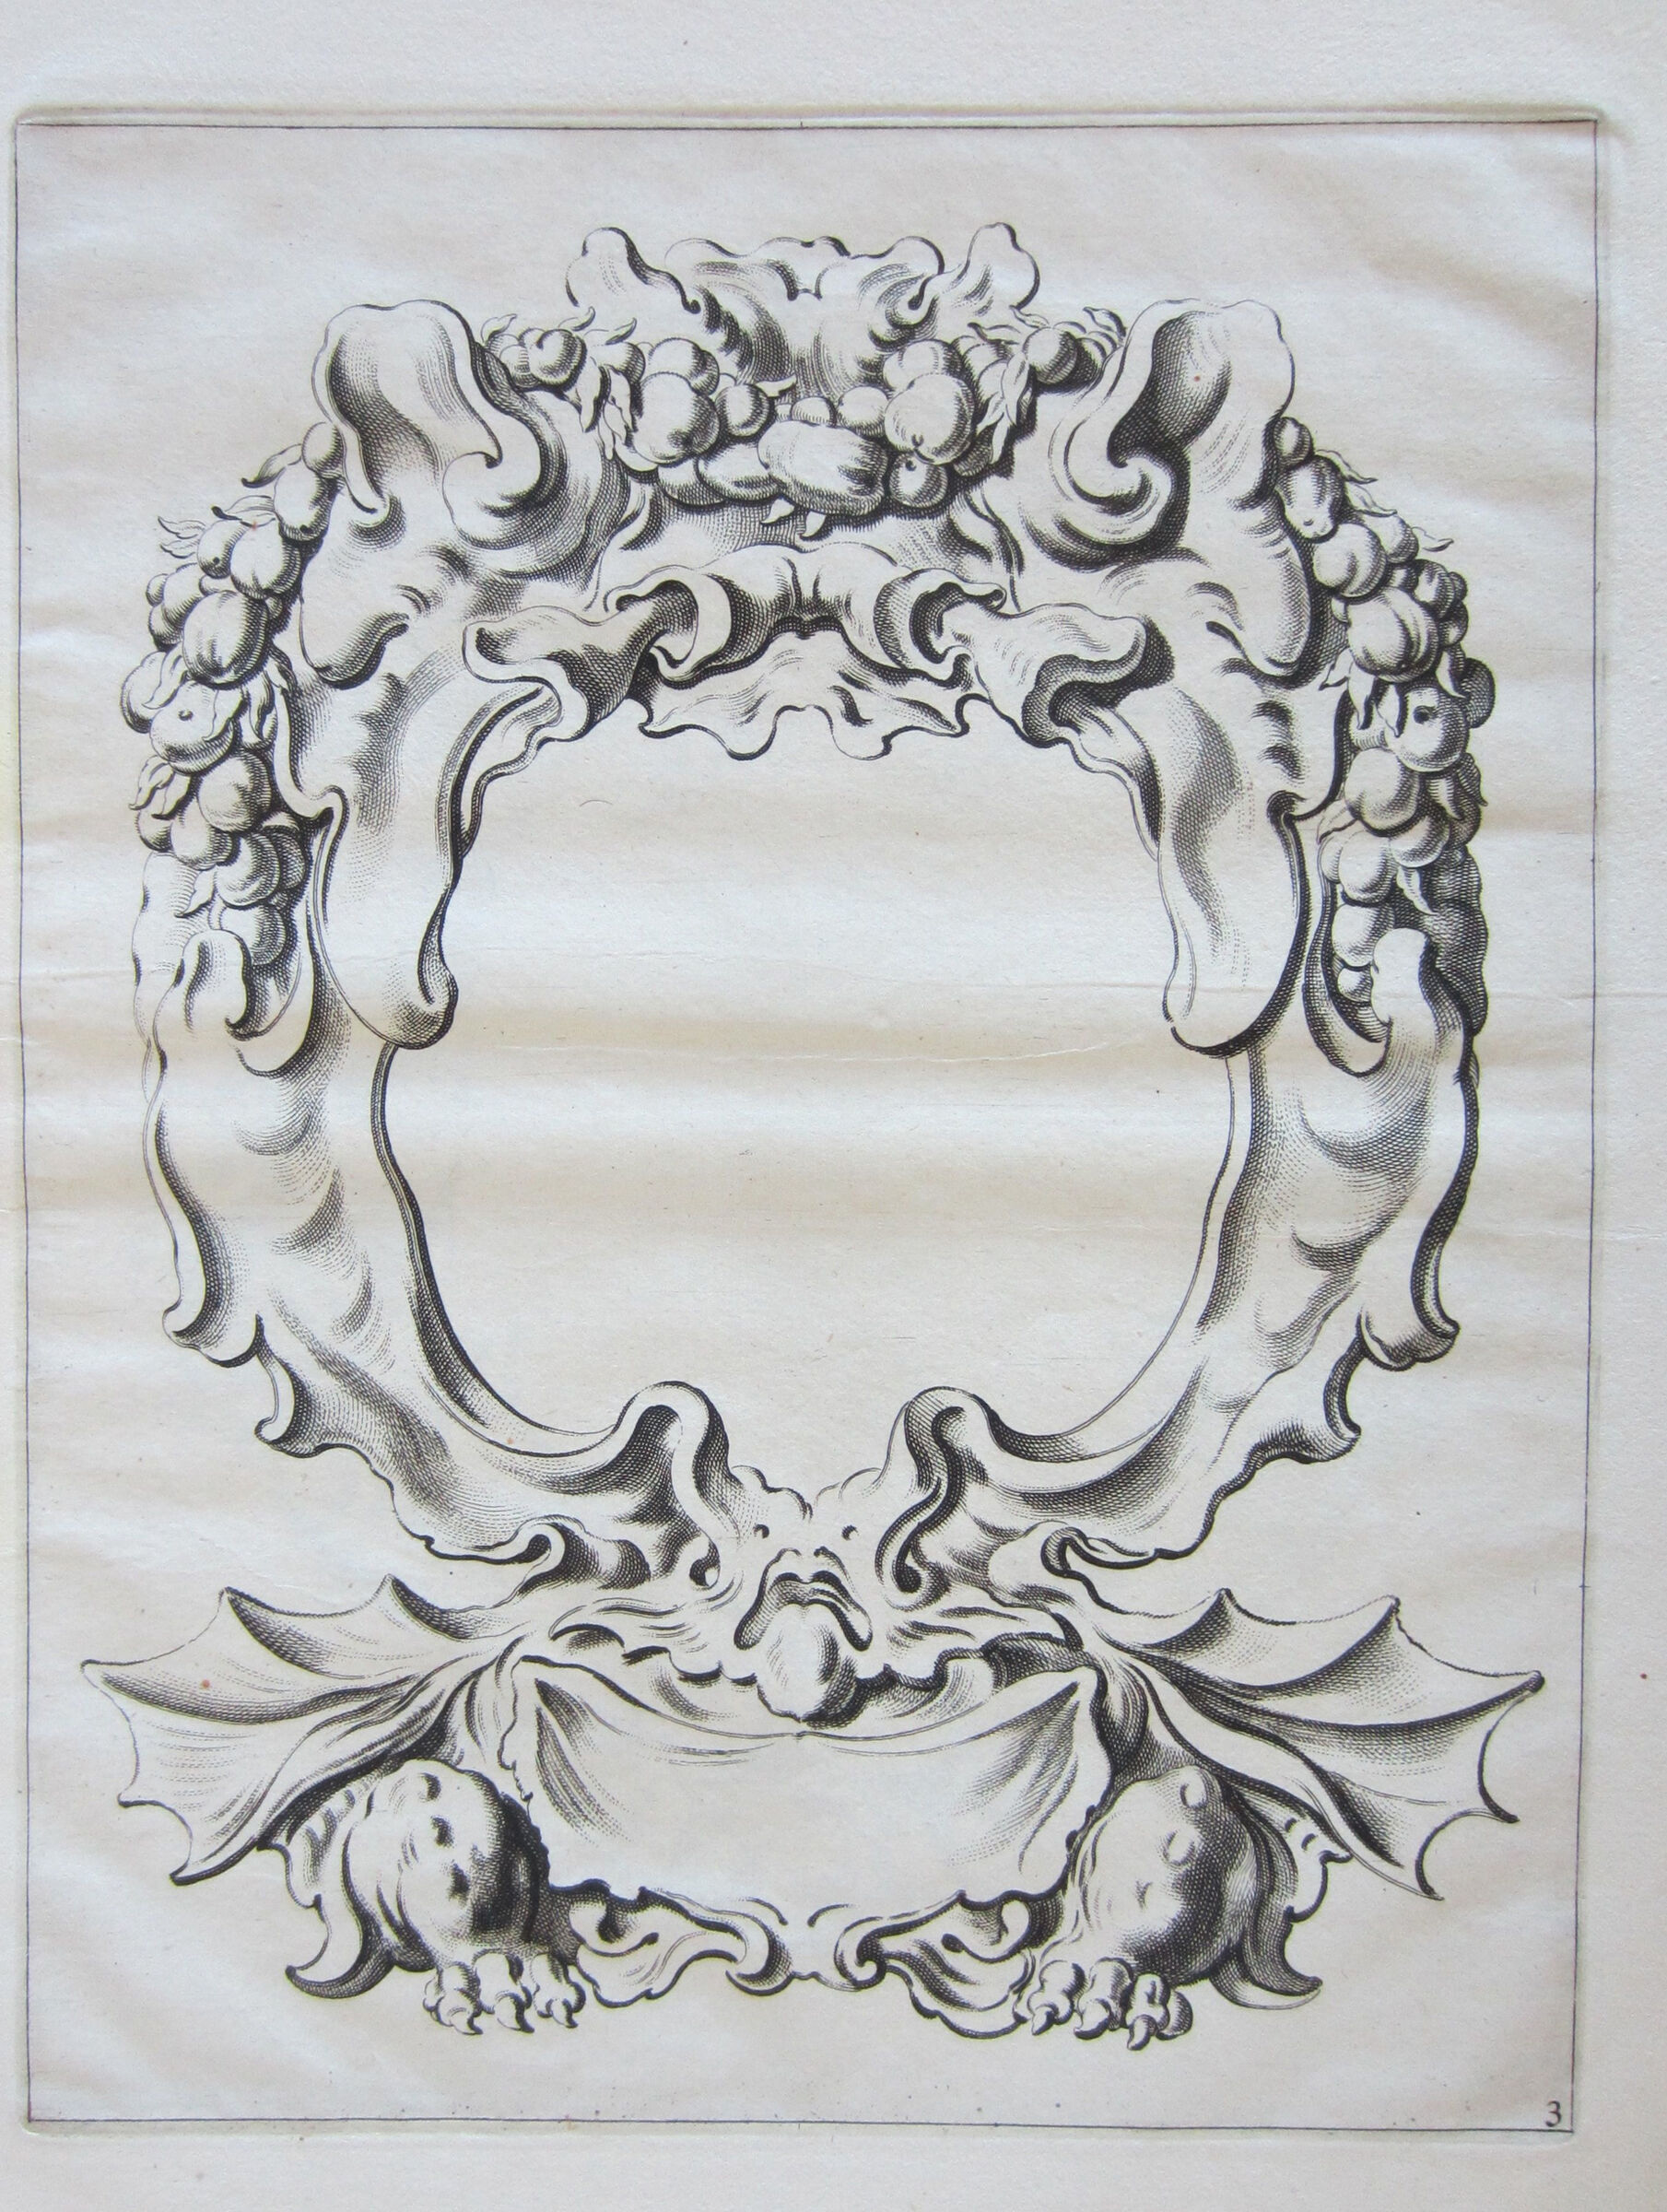 Auricular Cartouche With Fruit Garlands And A Winged Monster With Clawed Paws